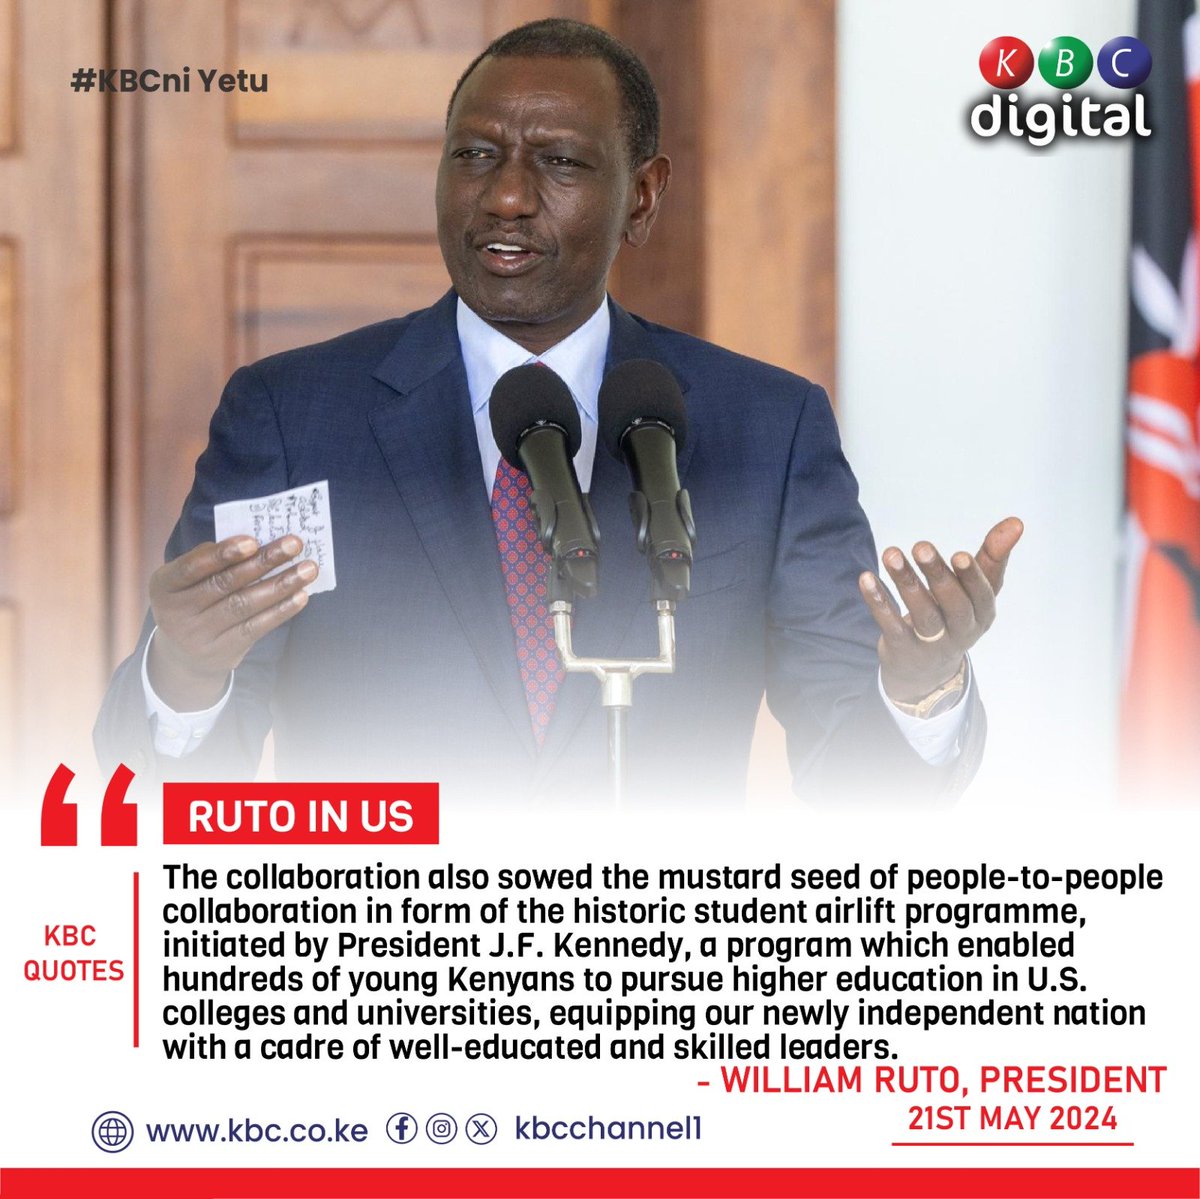 'The collaboration also sowed the mustard seed of people-to-people collaboration in form of the historic student airlift programme, initiated by President J.F. Kennedy, a program which enabled hundreds of young Kenyans to pursue higher education in U.S. colleges and universities,